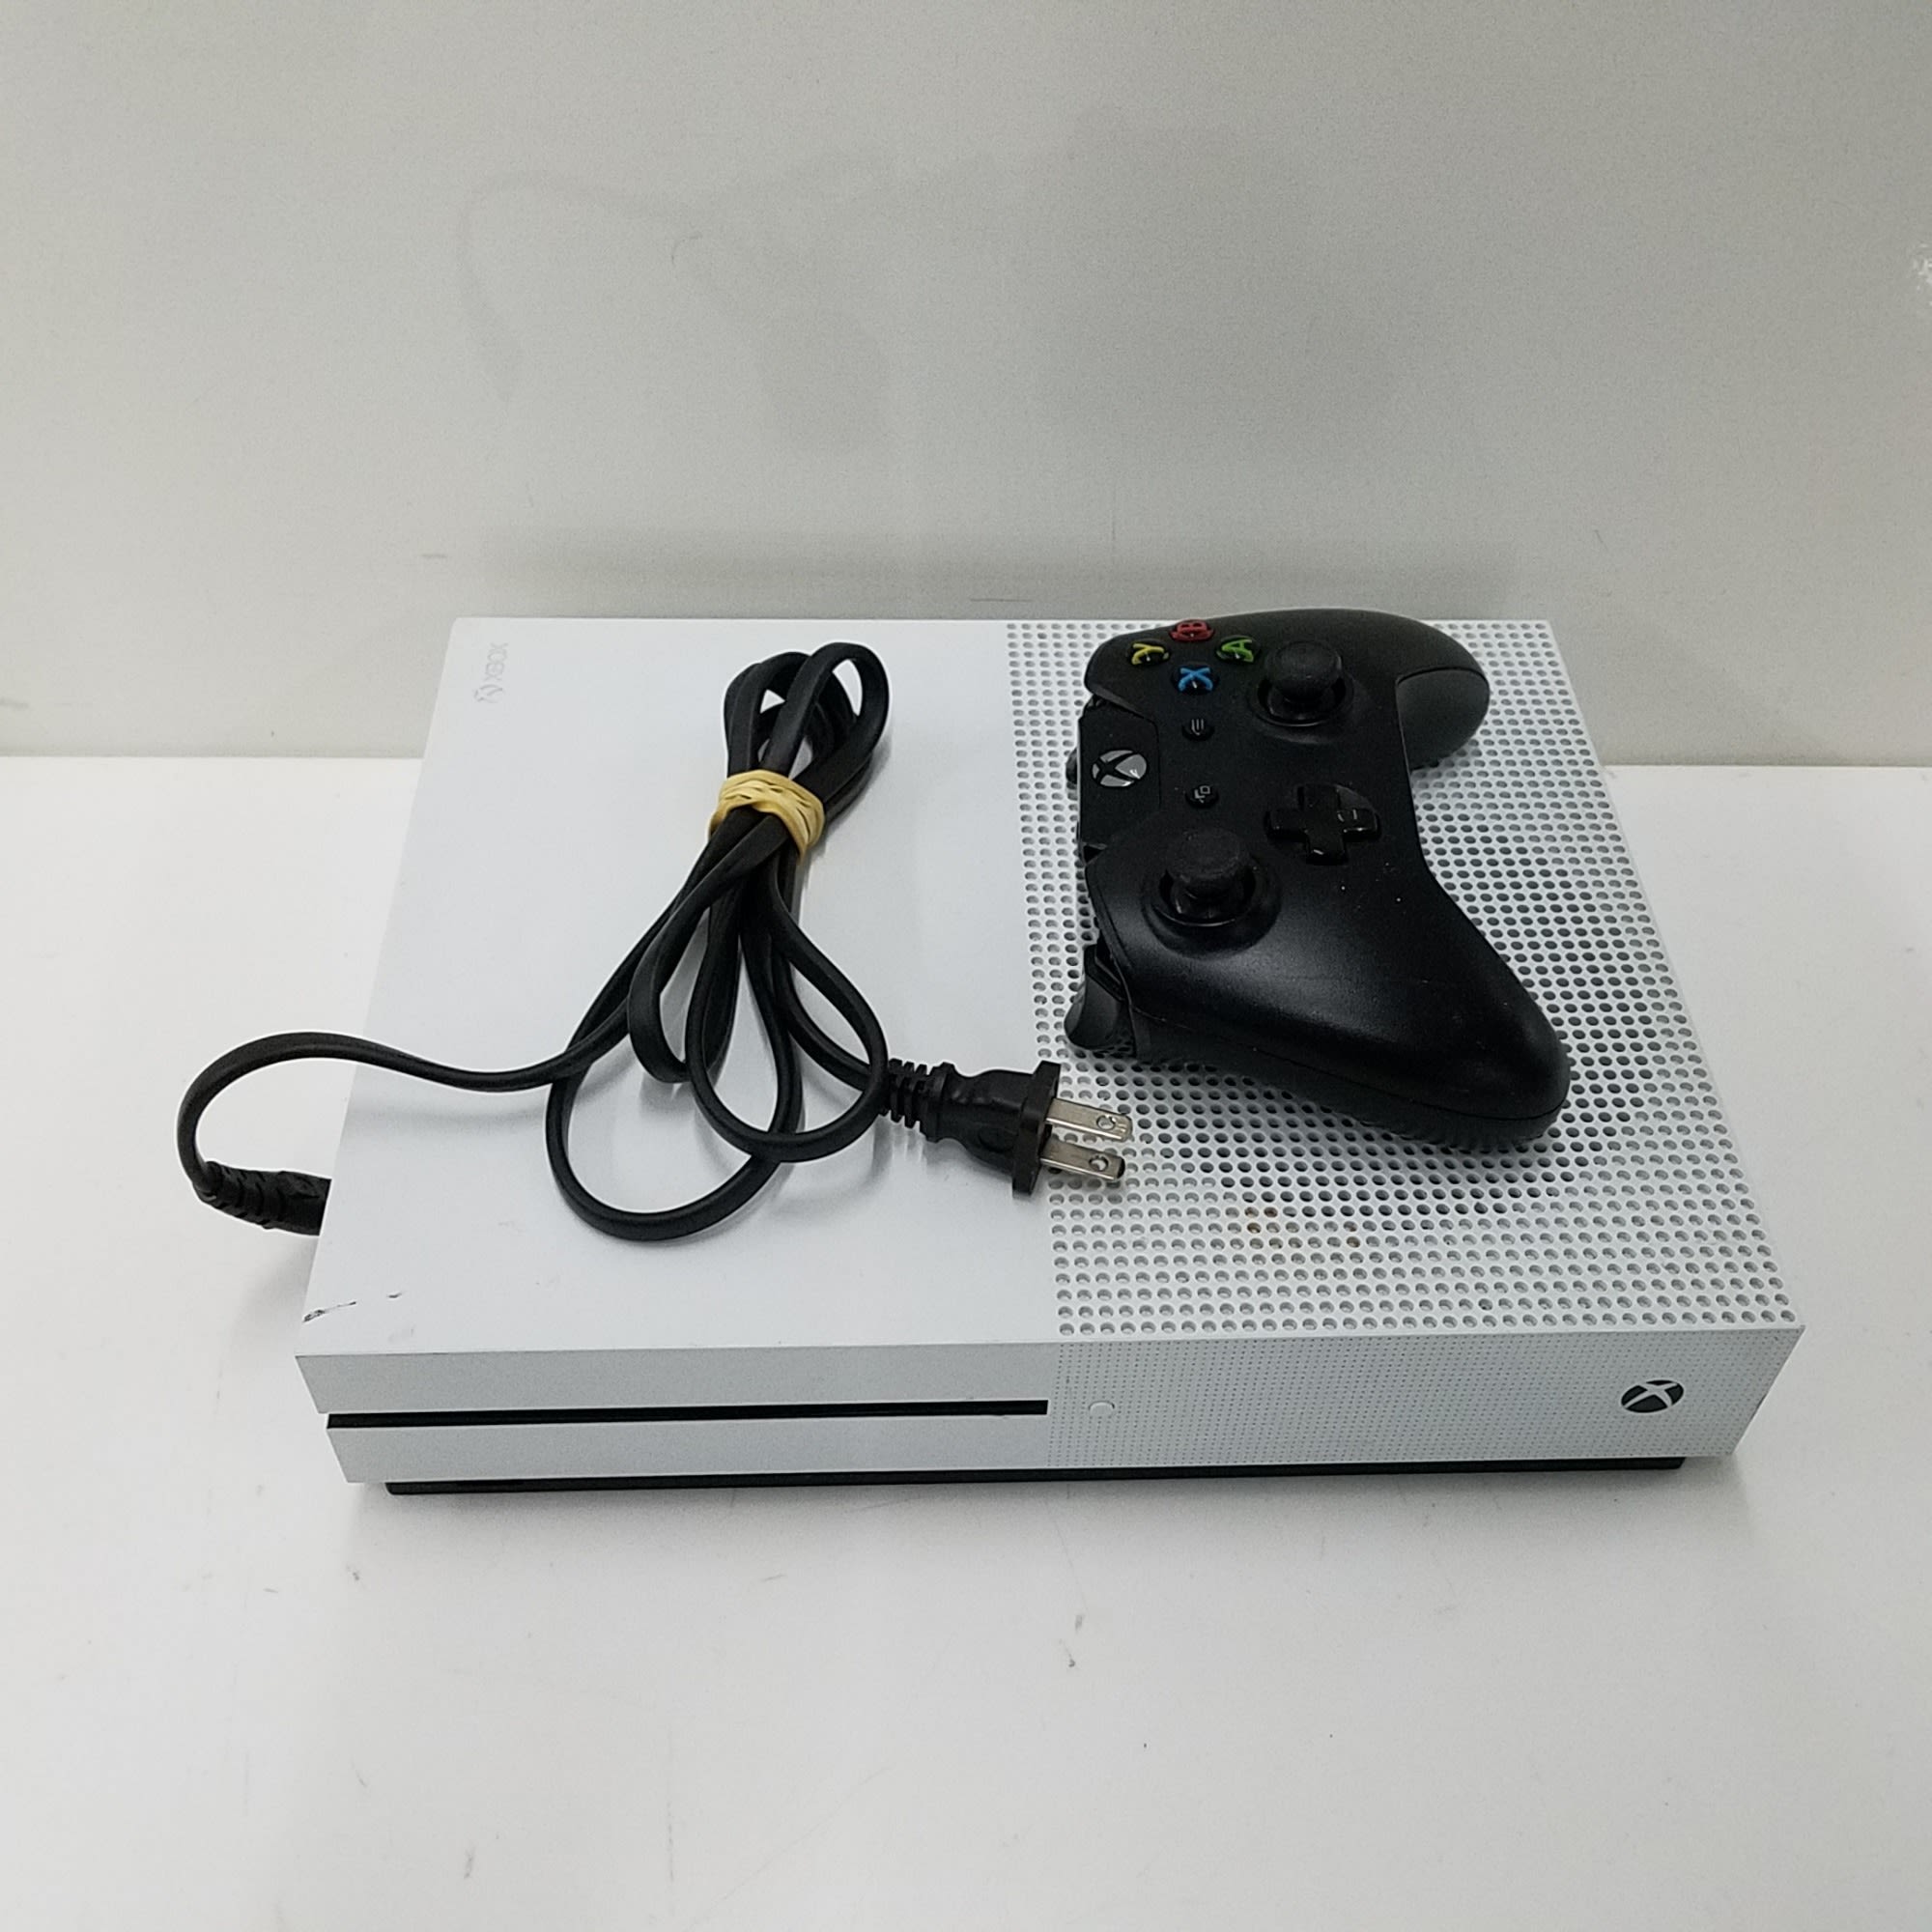 Buy Microsoft Xbox One S Console Model 1681 Storage 500GB for USD 286.80 |  GoodwillFinds